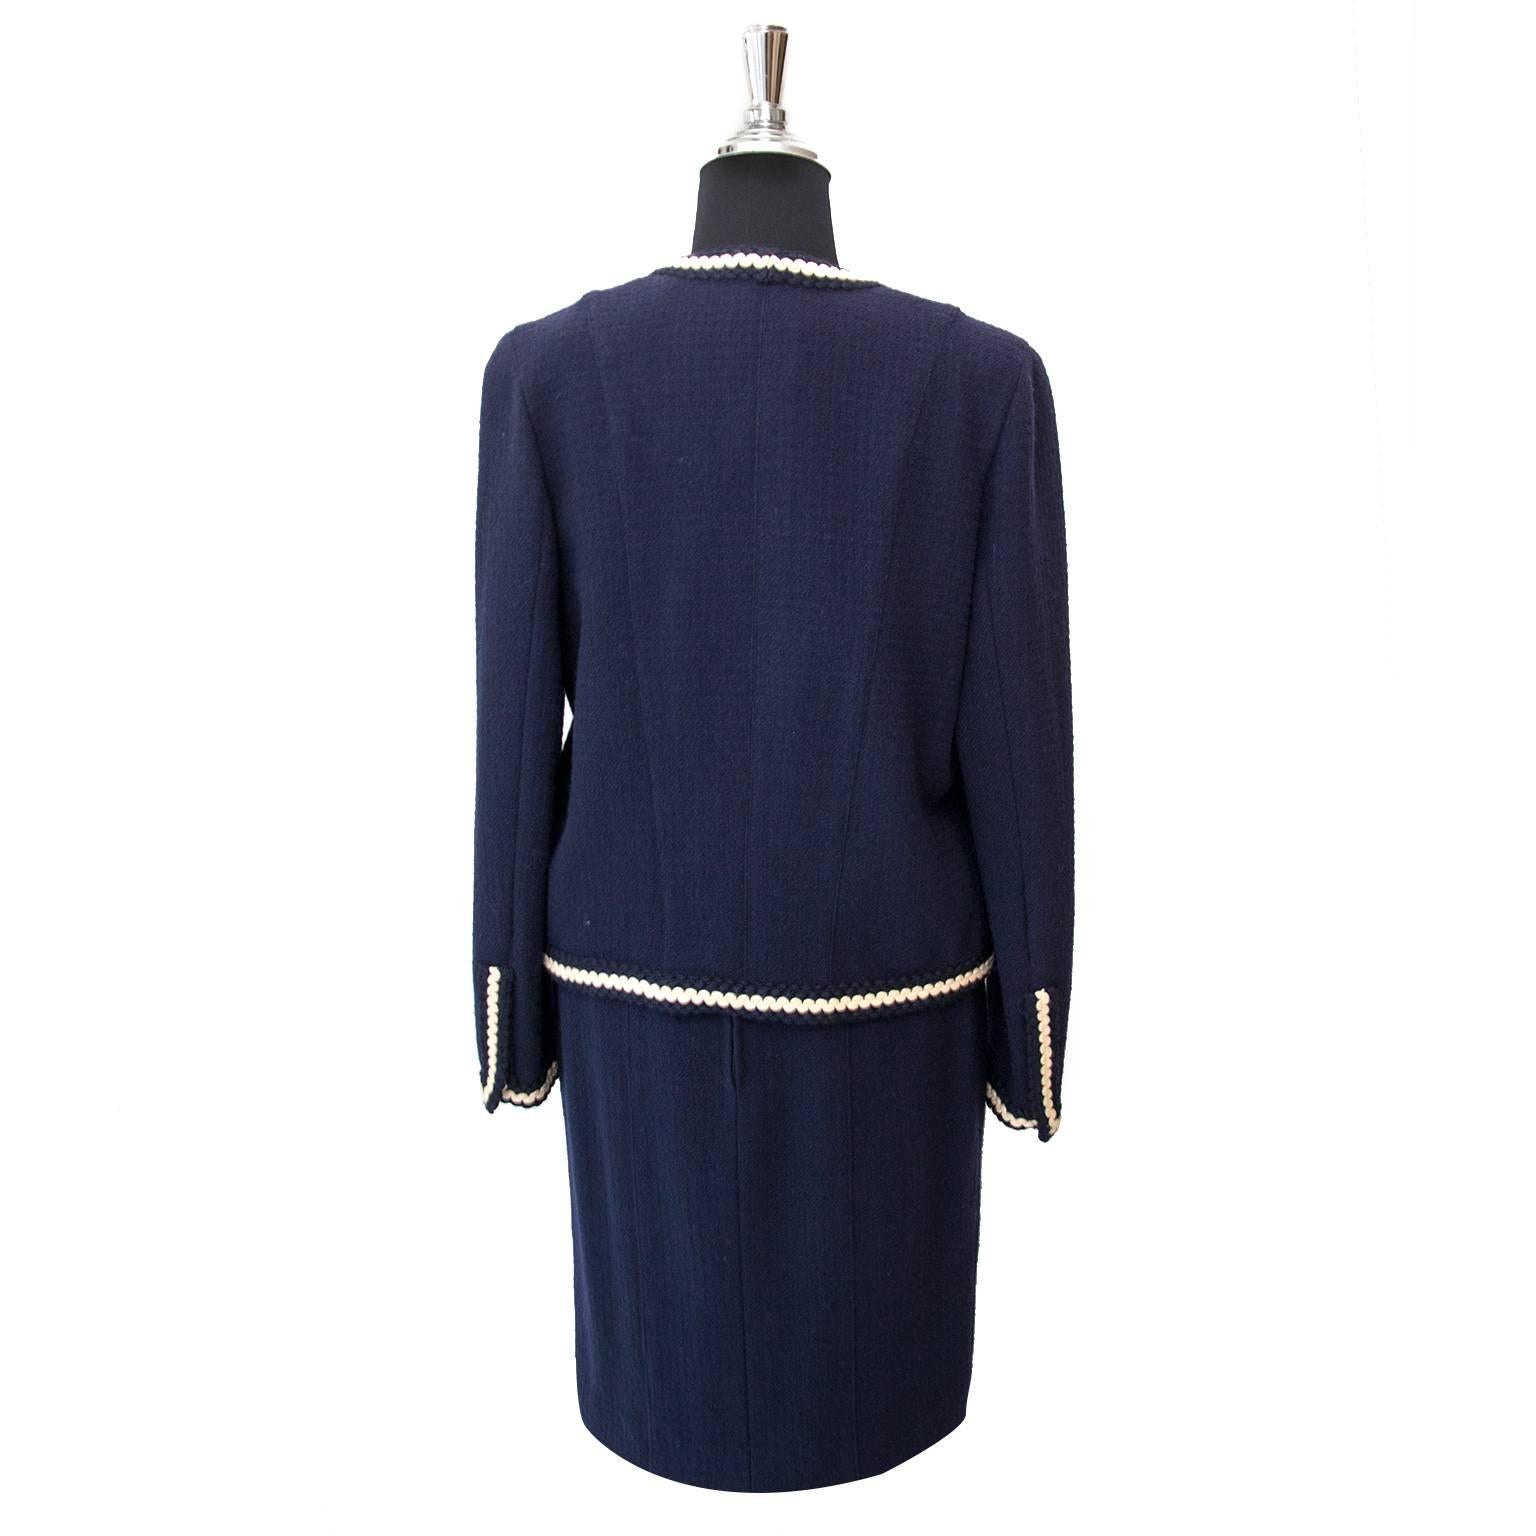 Chanel Dark Blue Tailleur SkIrt Set

There is nothing quite as iconic as a classic Chanel tweed piece.
This beautiful Chanel Tailleur comes in a dark blue color with white linings.
The fabric contains 100% wool and 100% rinse linings.

Wear this